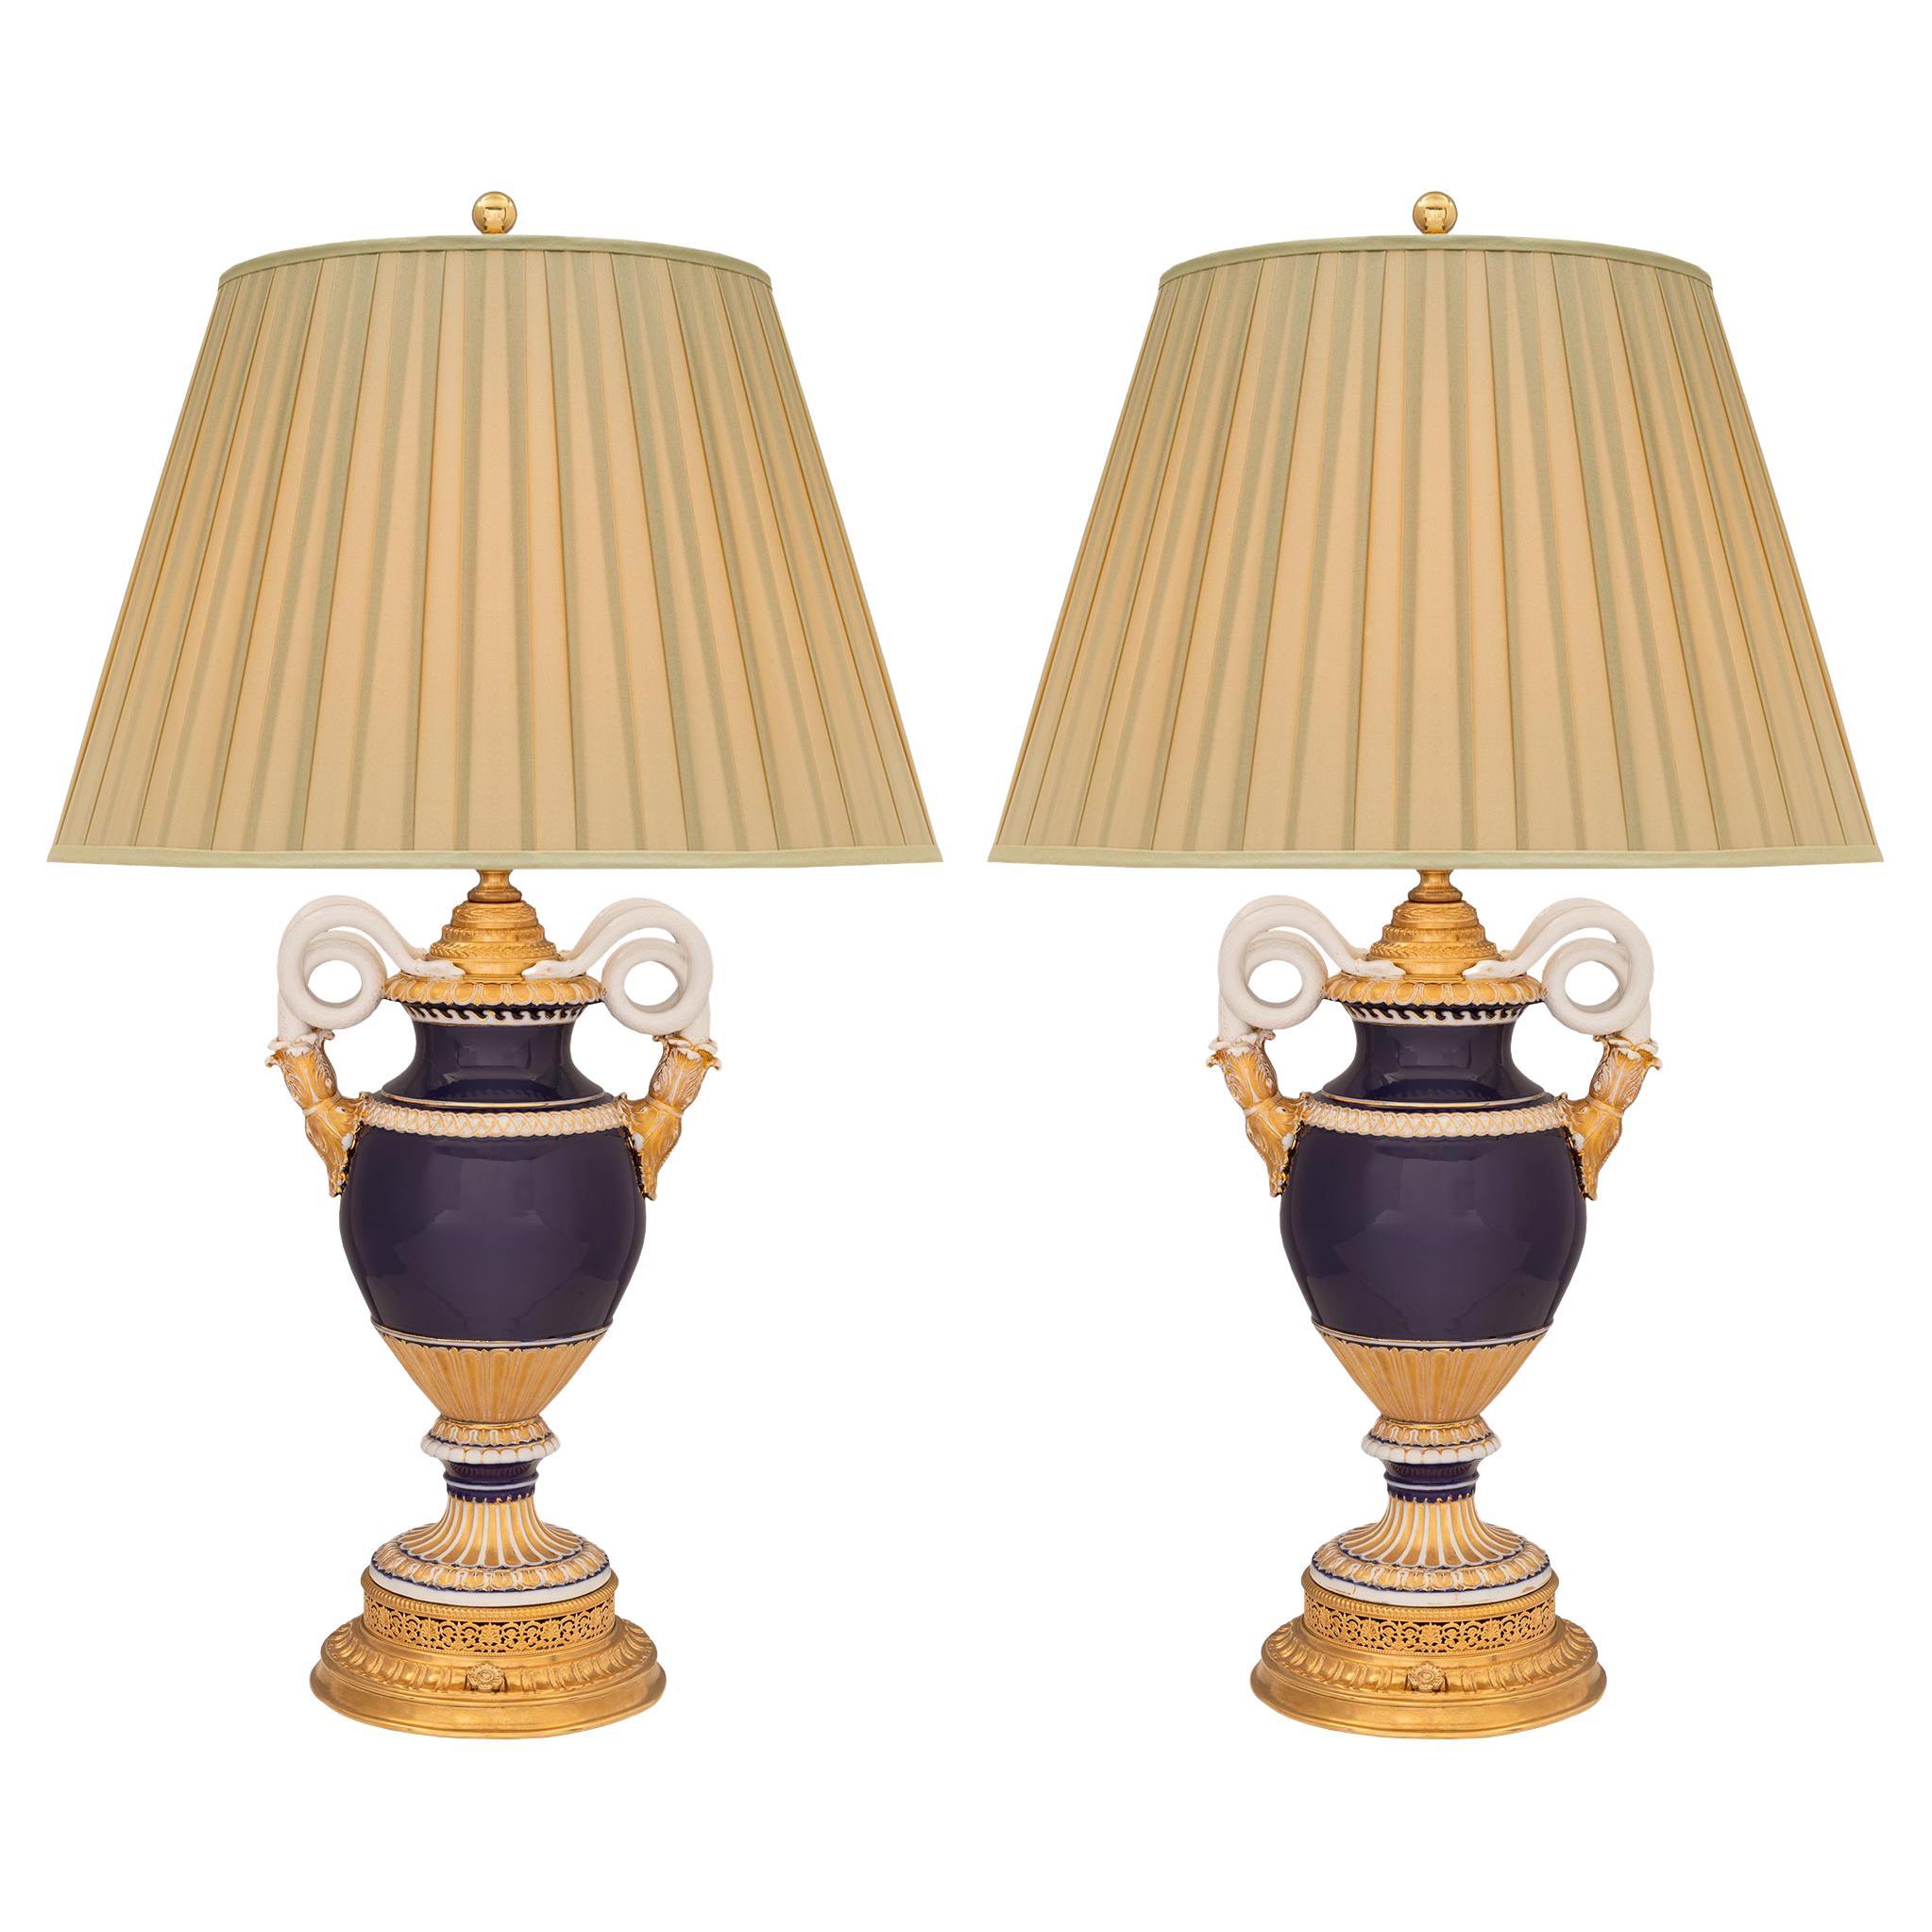 Pair of French and German Collaboration 19th Century Porcelain and Ormolu Lamps For Sale